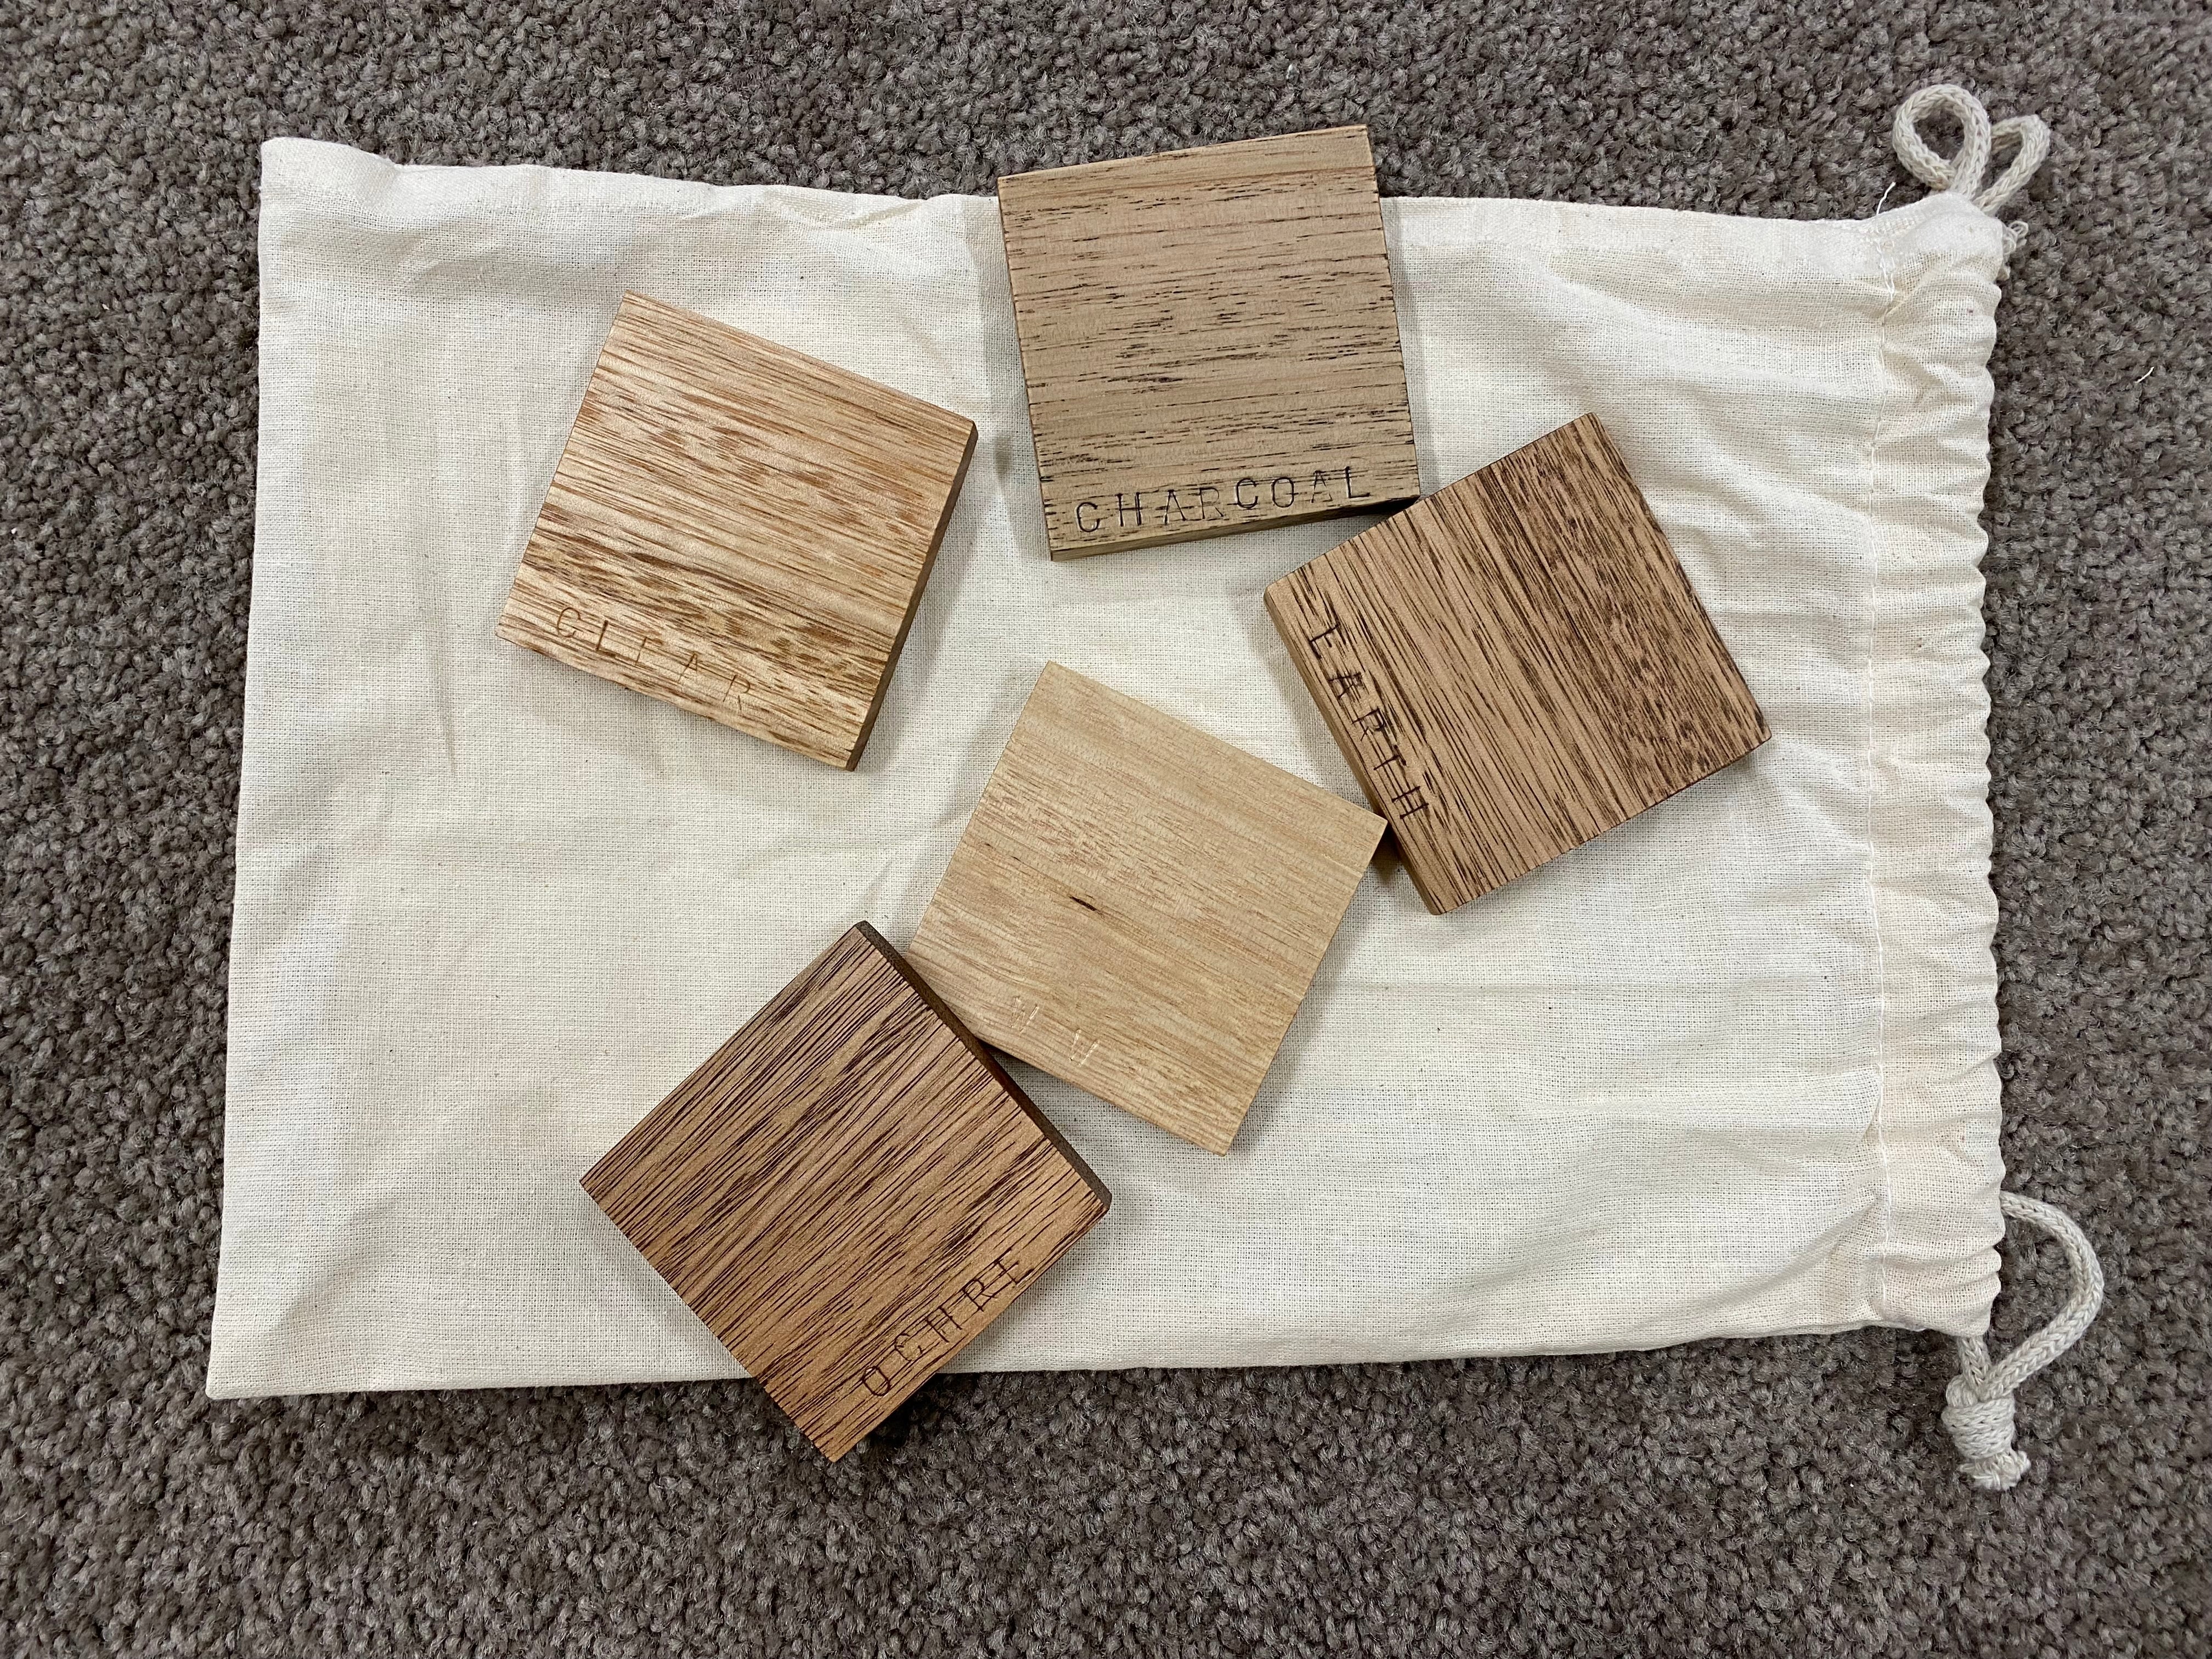 Samples of our materials